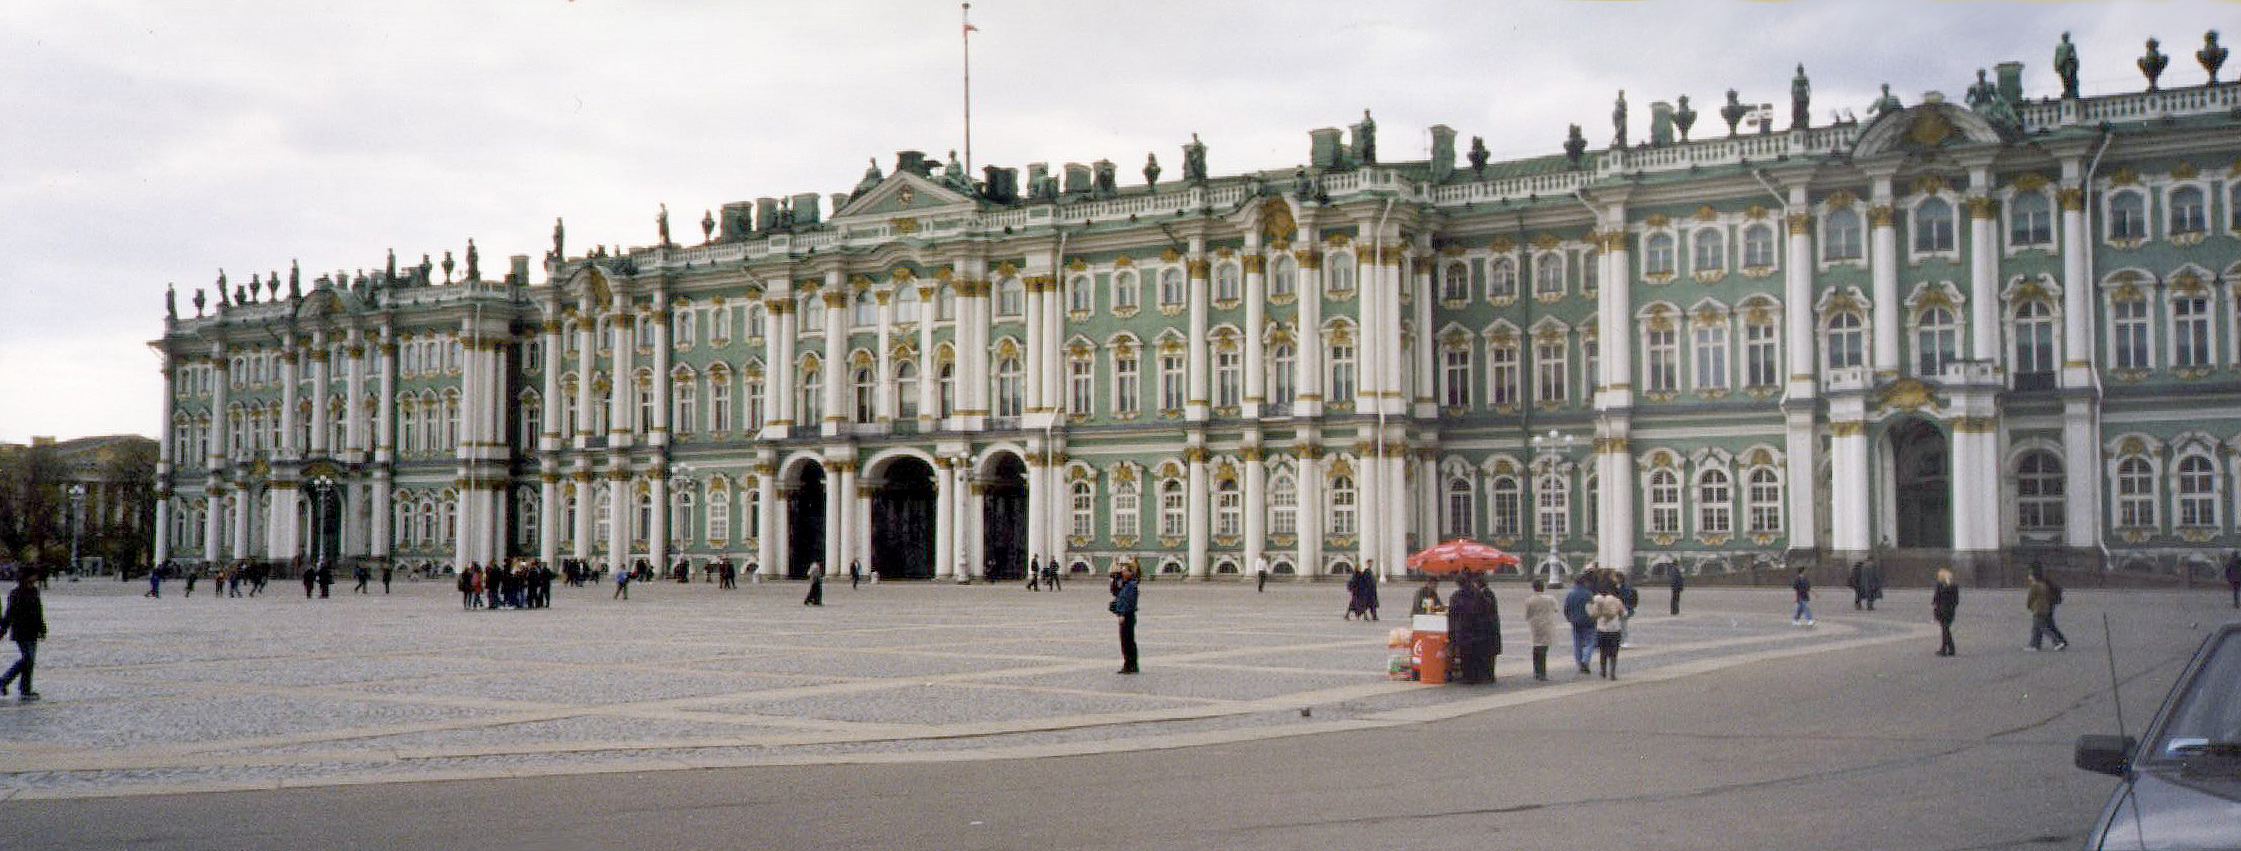 Amazing Hermitage Museum Pictures & Backgrounds